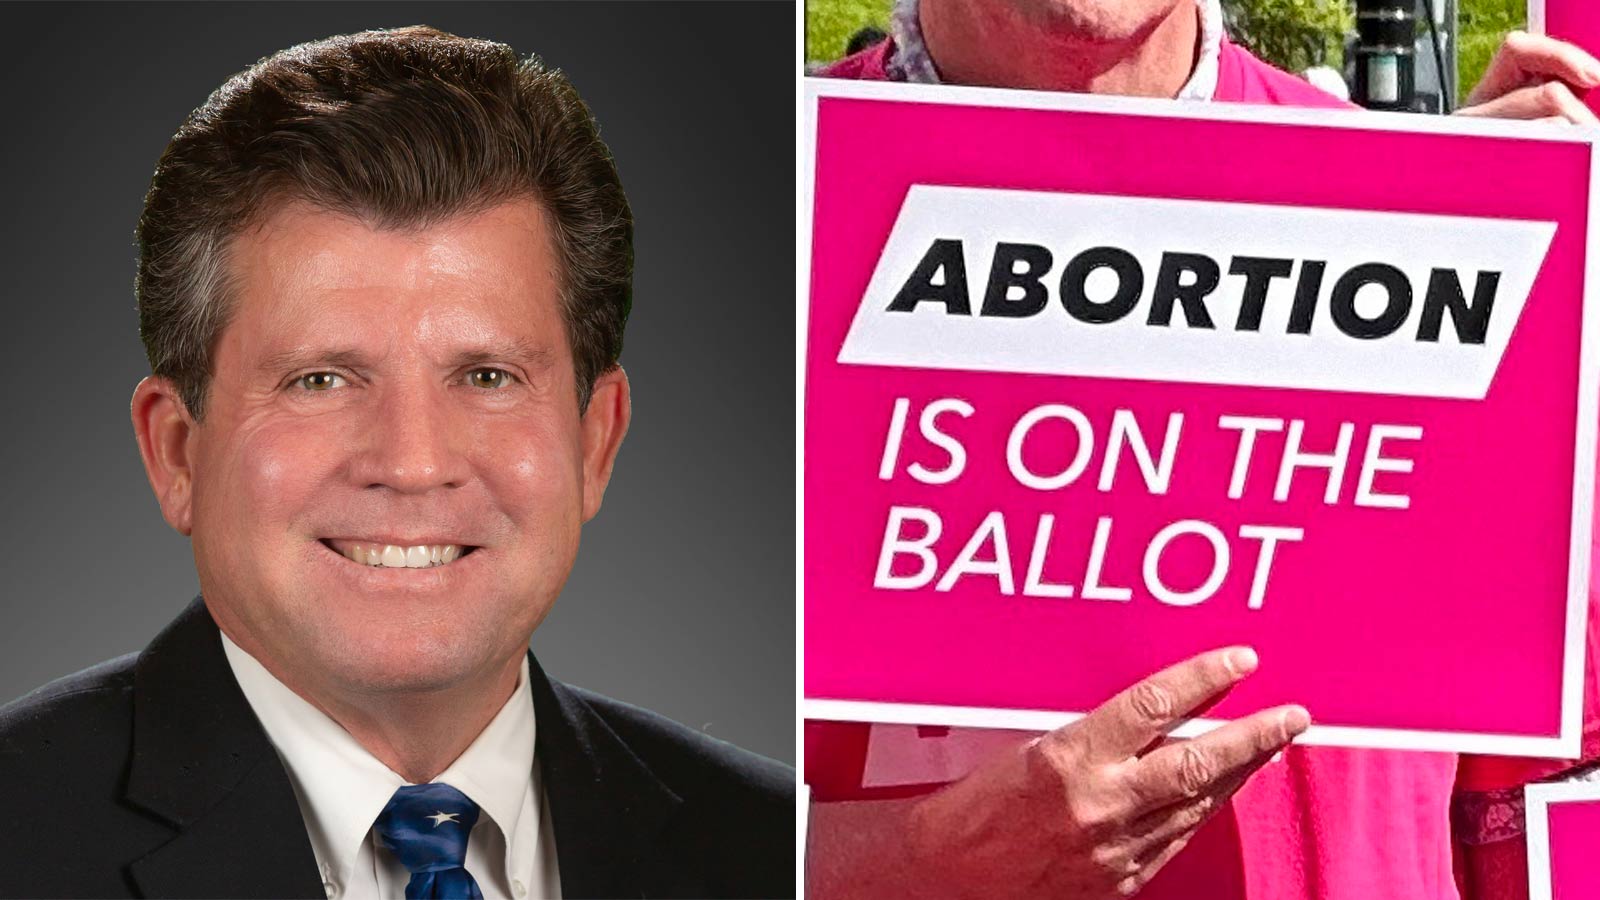 Arizona Republican who approved repeal of near-total abortion ban explains his vote